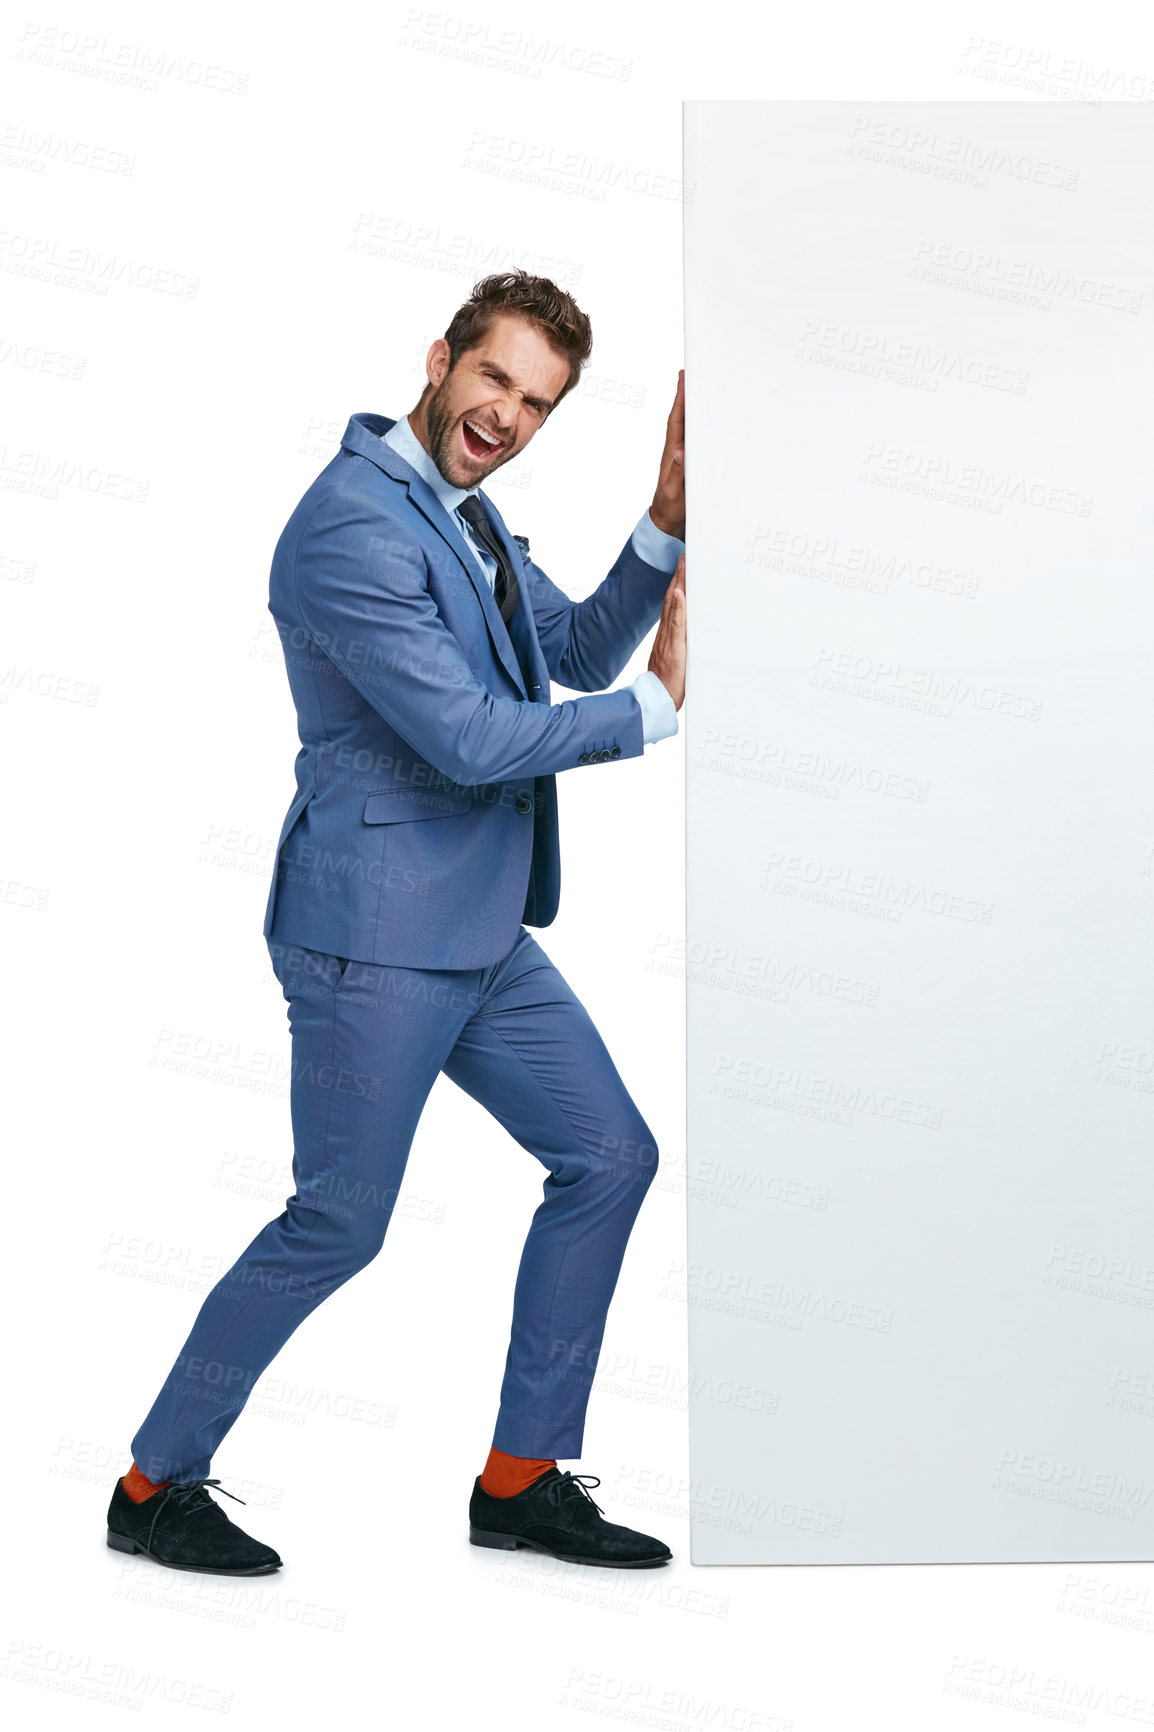 Buy stock photo Studio shot of a handsome businessman pushing a wall against a white background